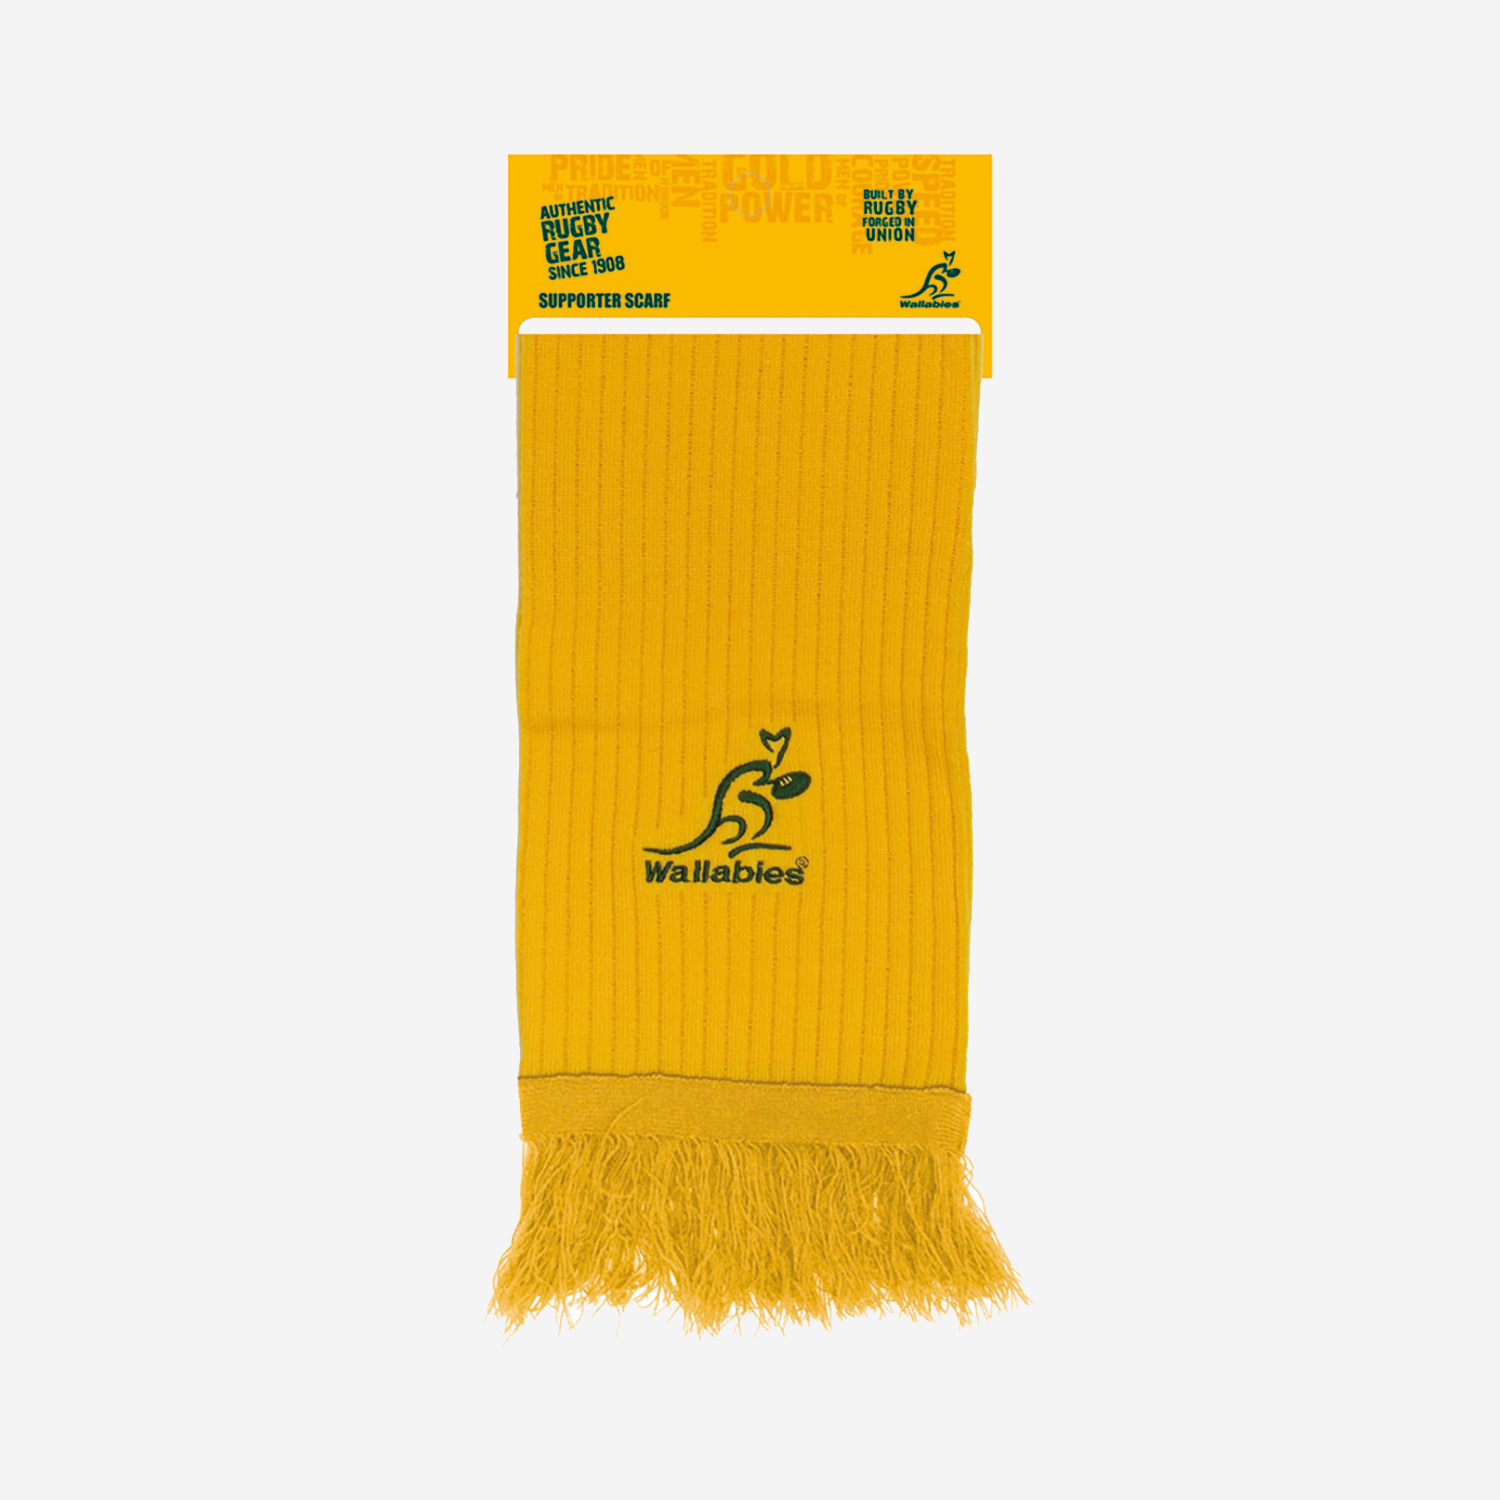 Wallabies Supporter Scarf